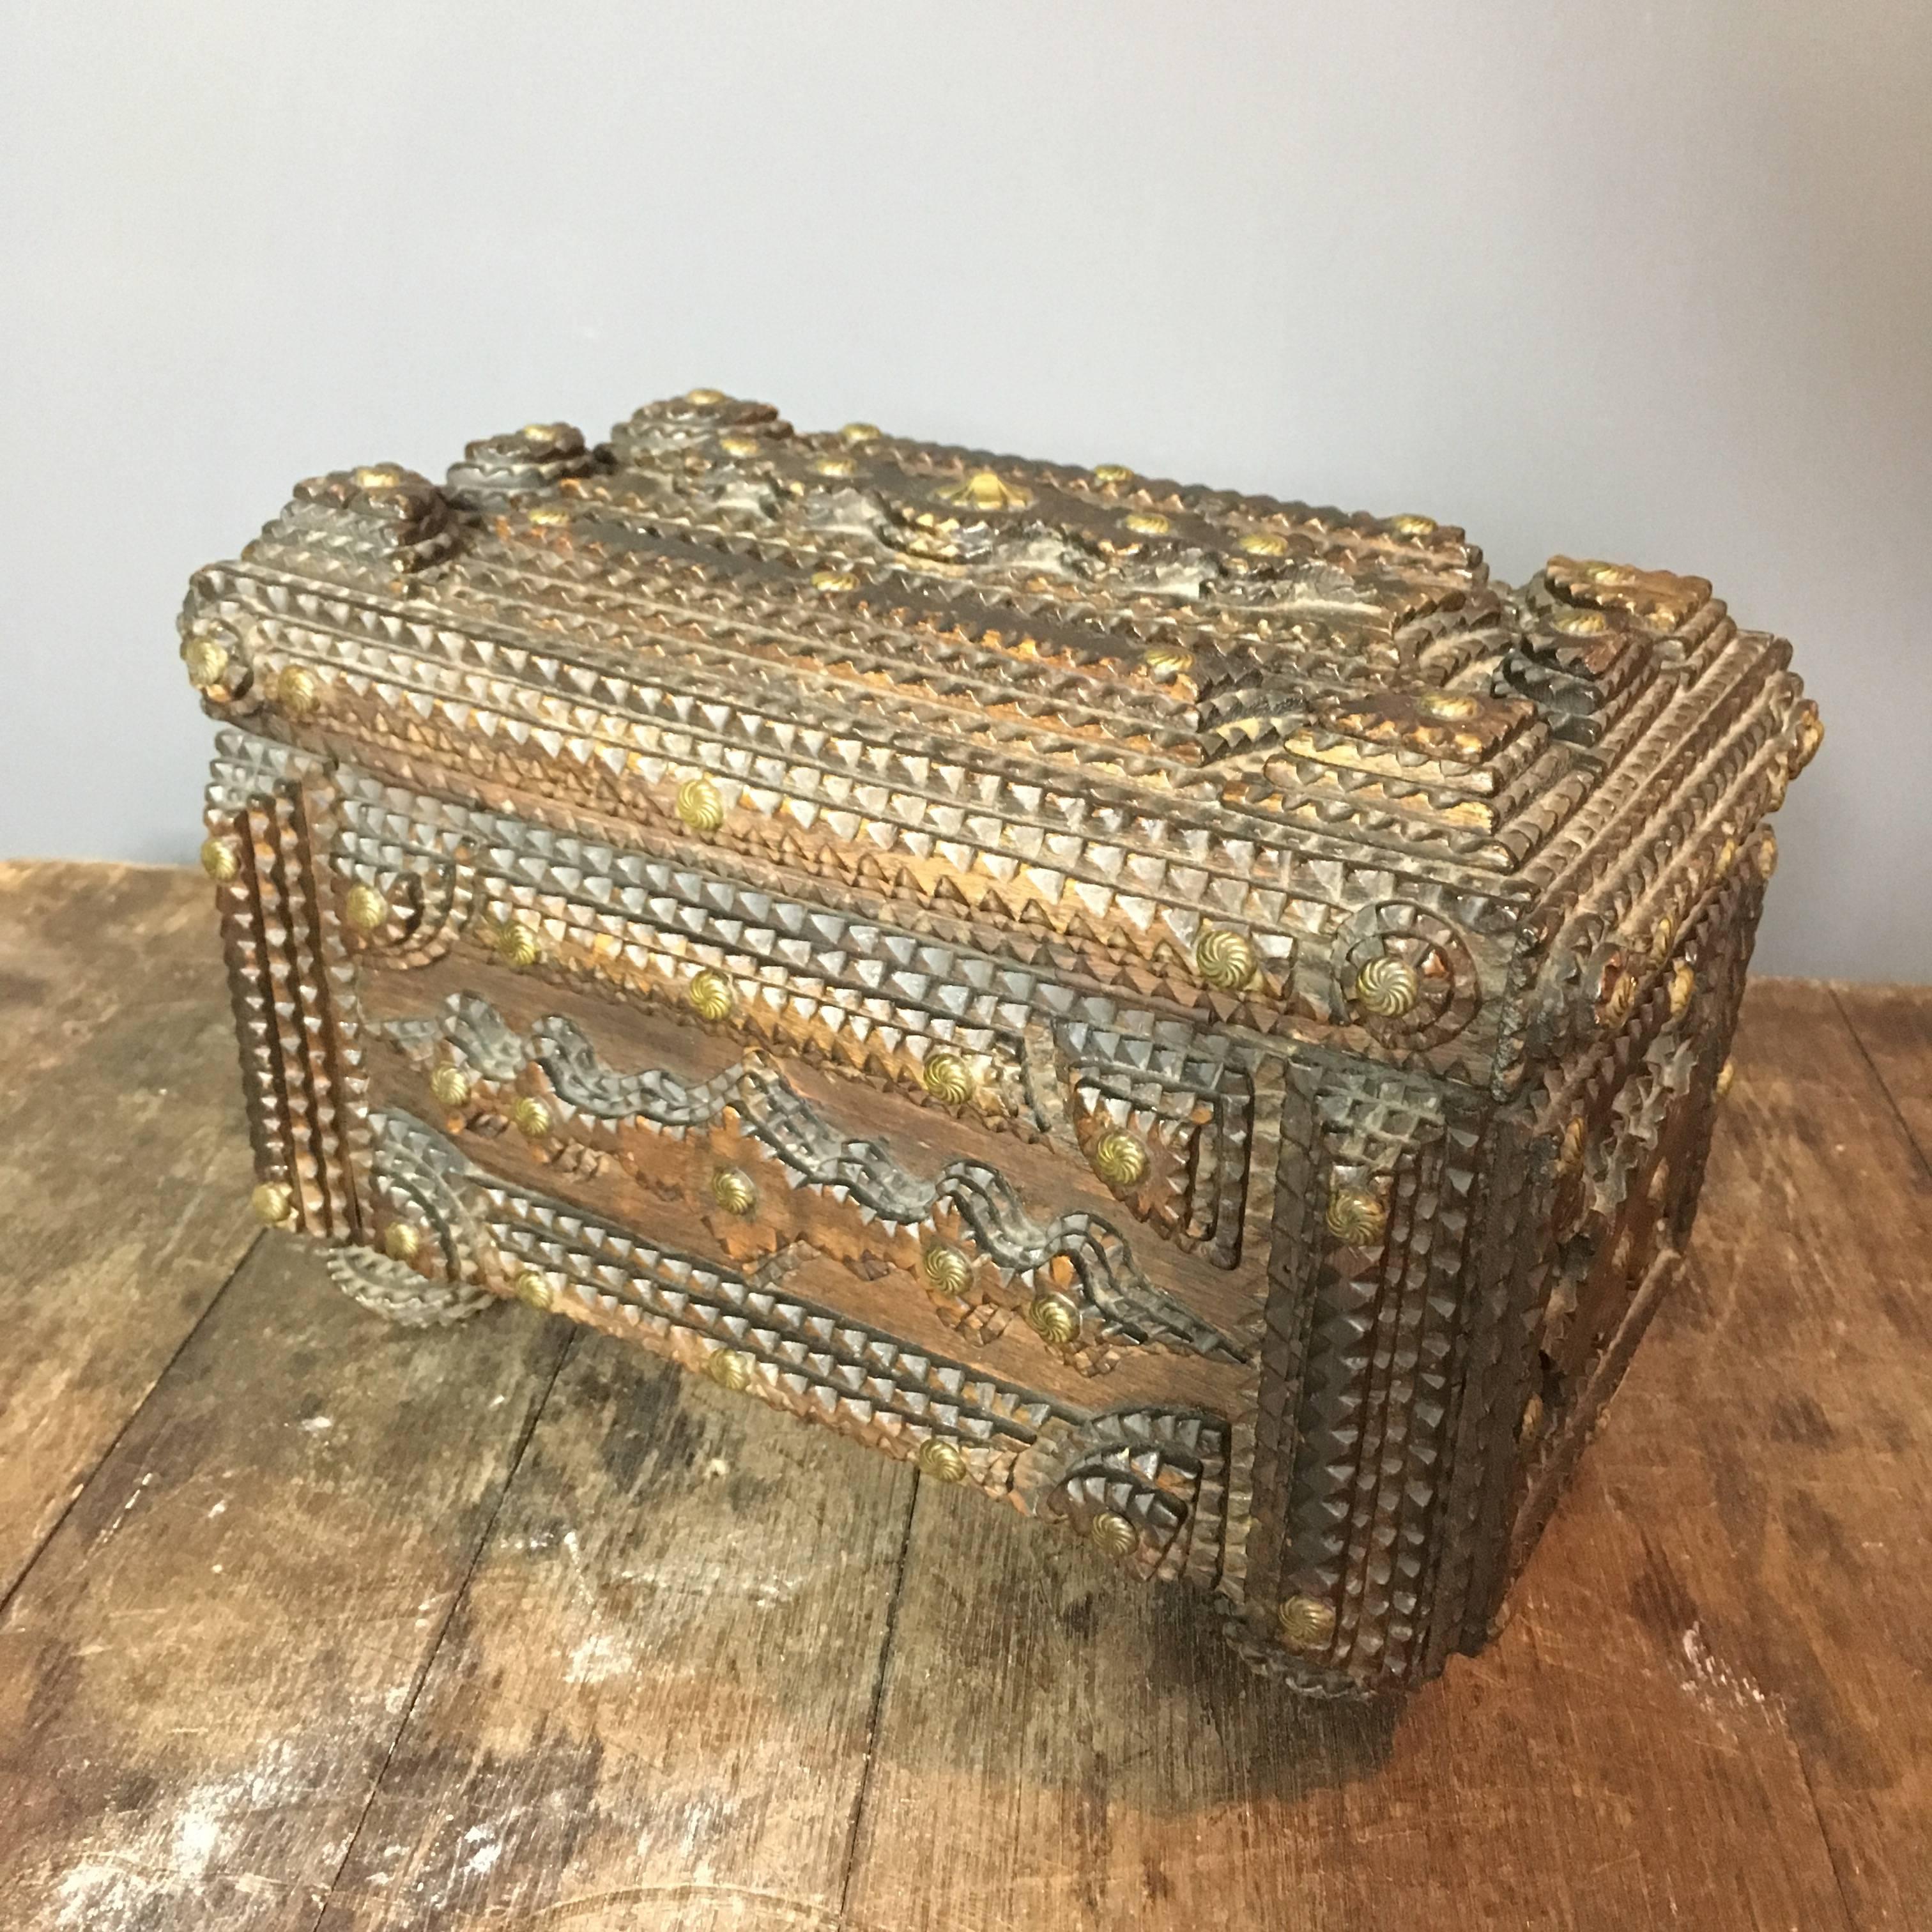 Hand-Carved Antique Handcrafted Tramp Art Wooden Box